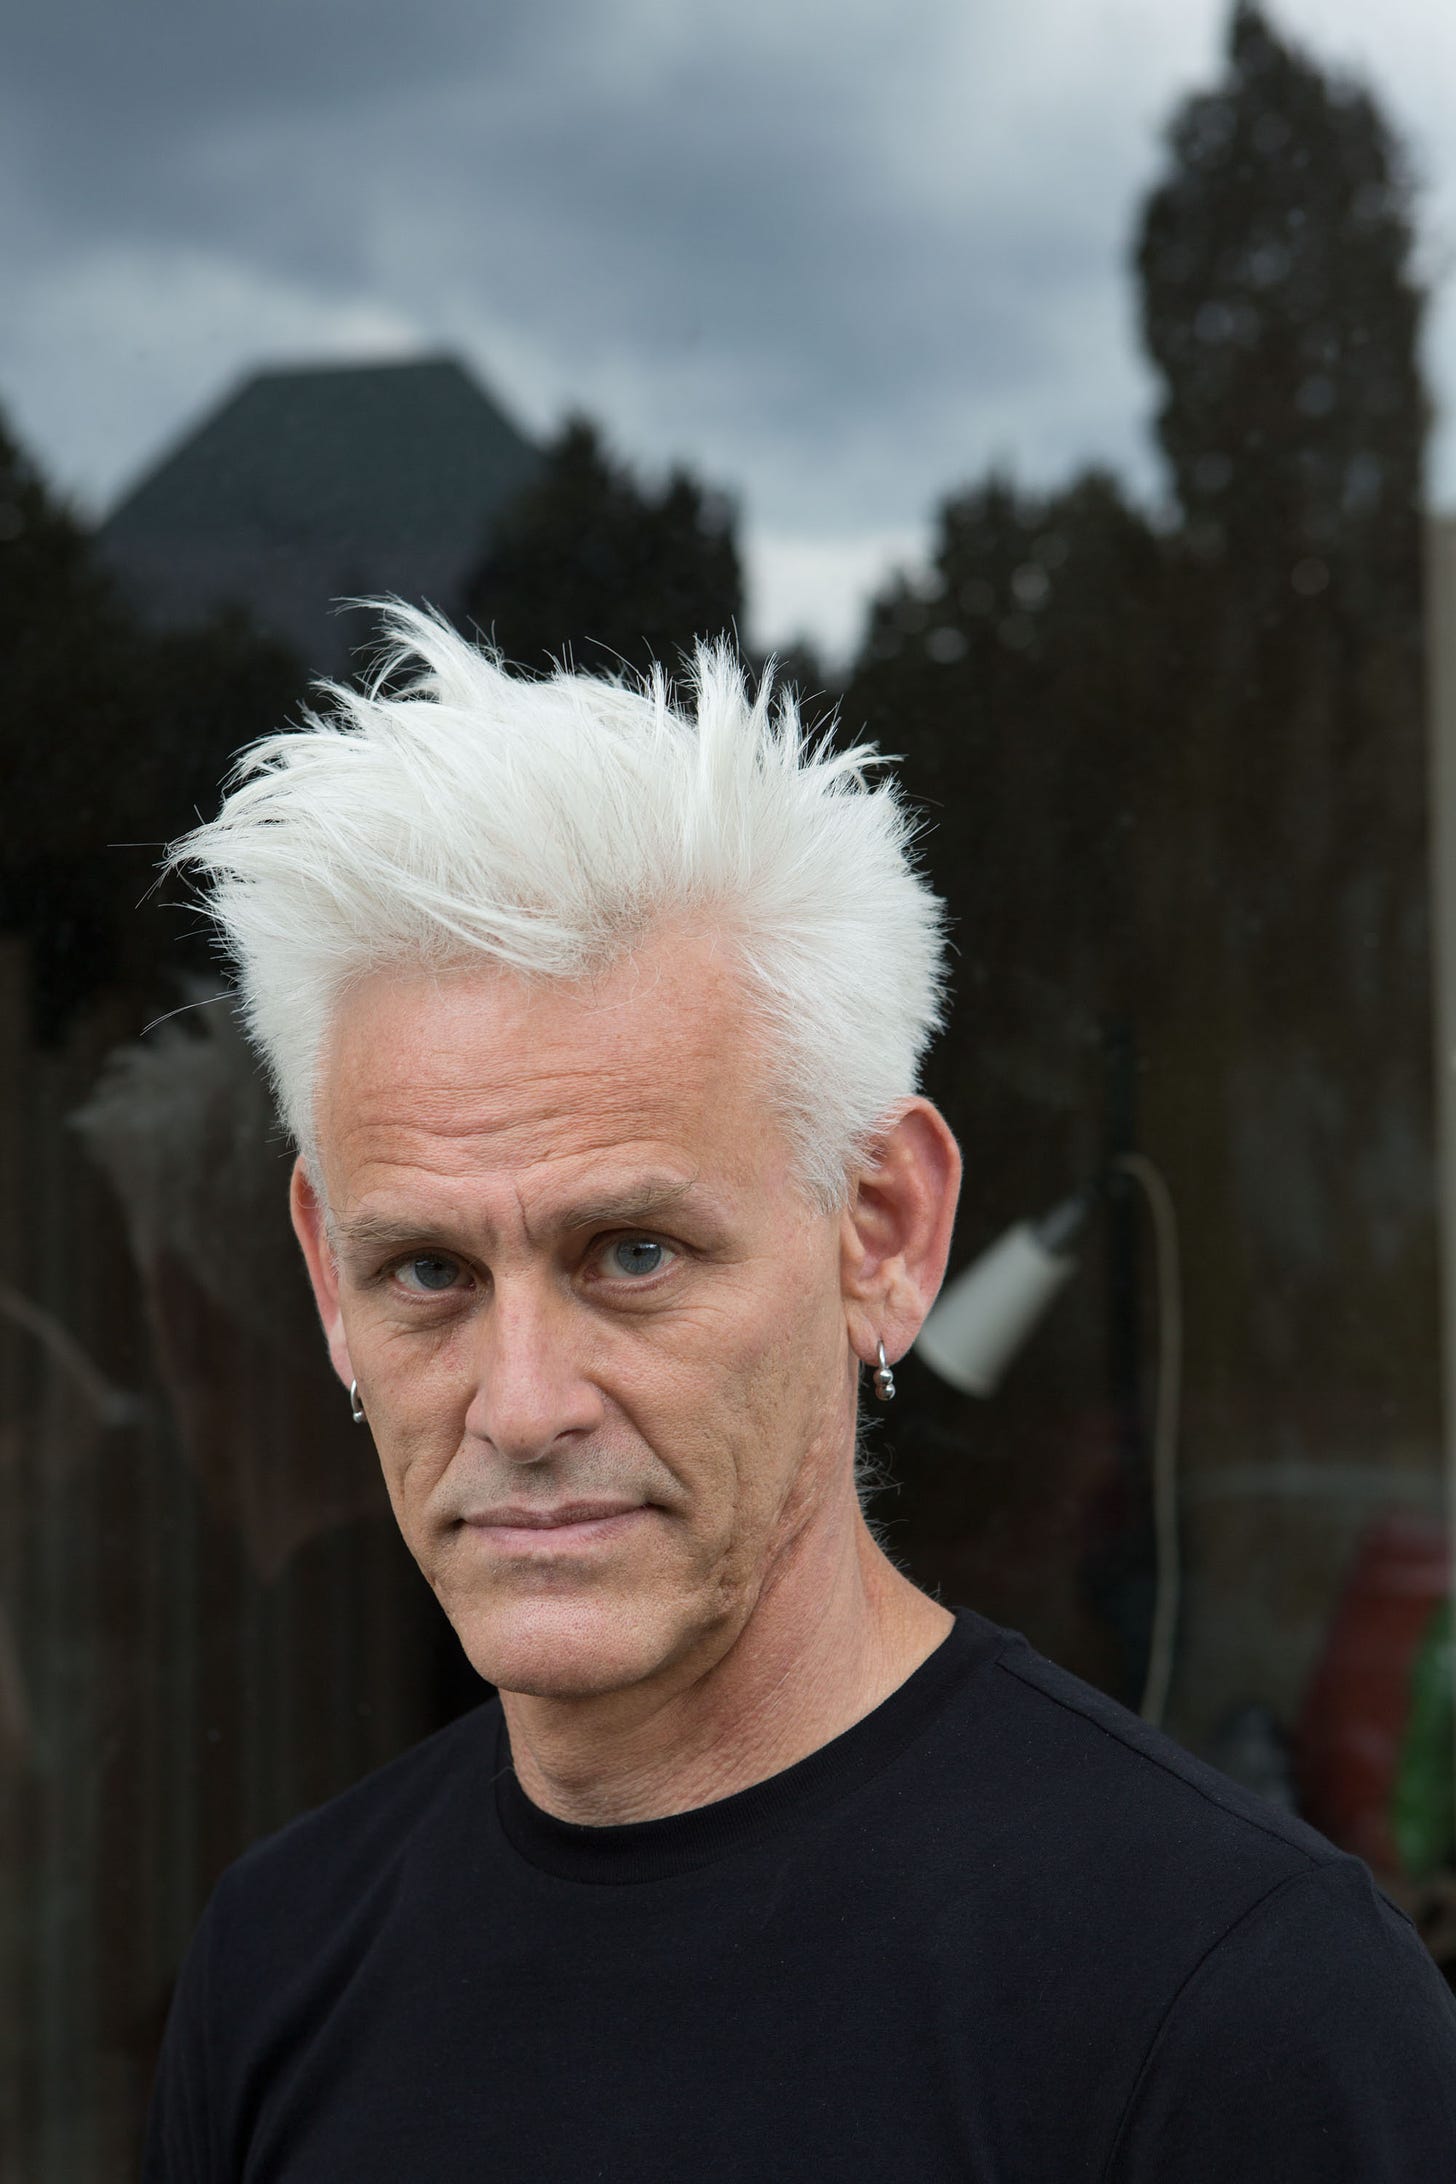 Jess Curtis wears a black tee shirt and silver earrings. He has a shock of white hair and looks into the camera. (photo: Sven Hagolani)